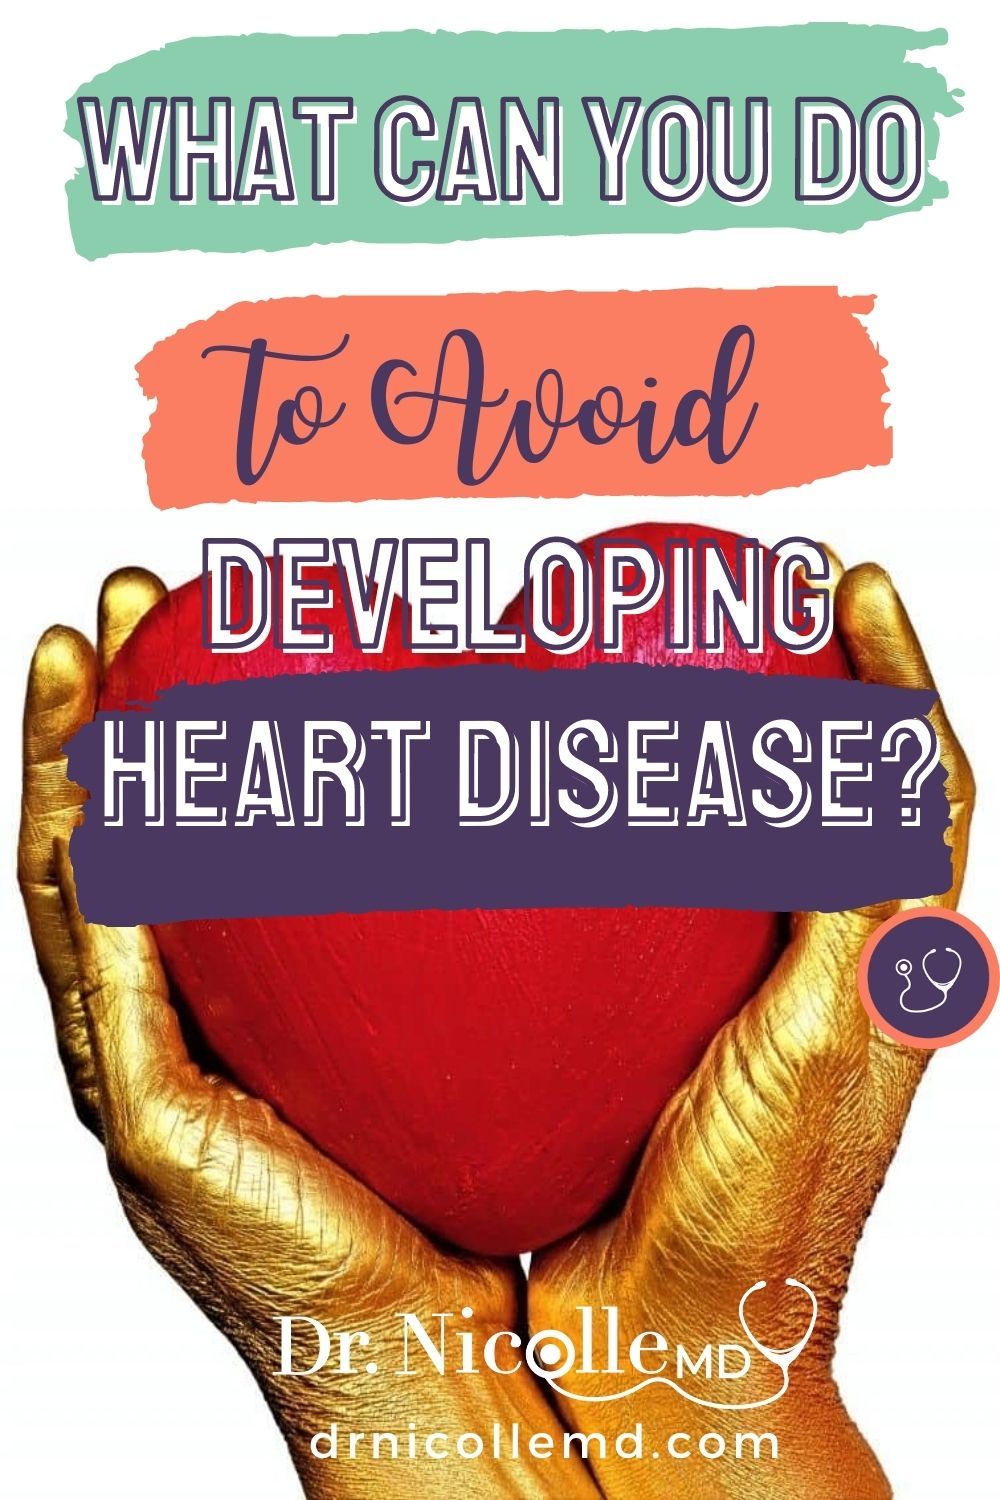 What Can You Do to Avoid Developing Heart Disease?